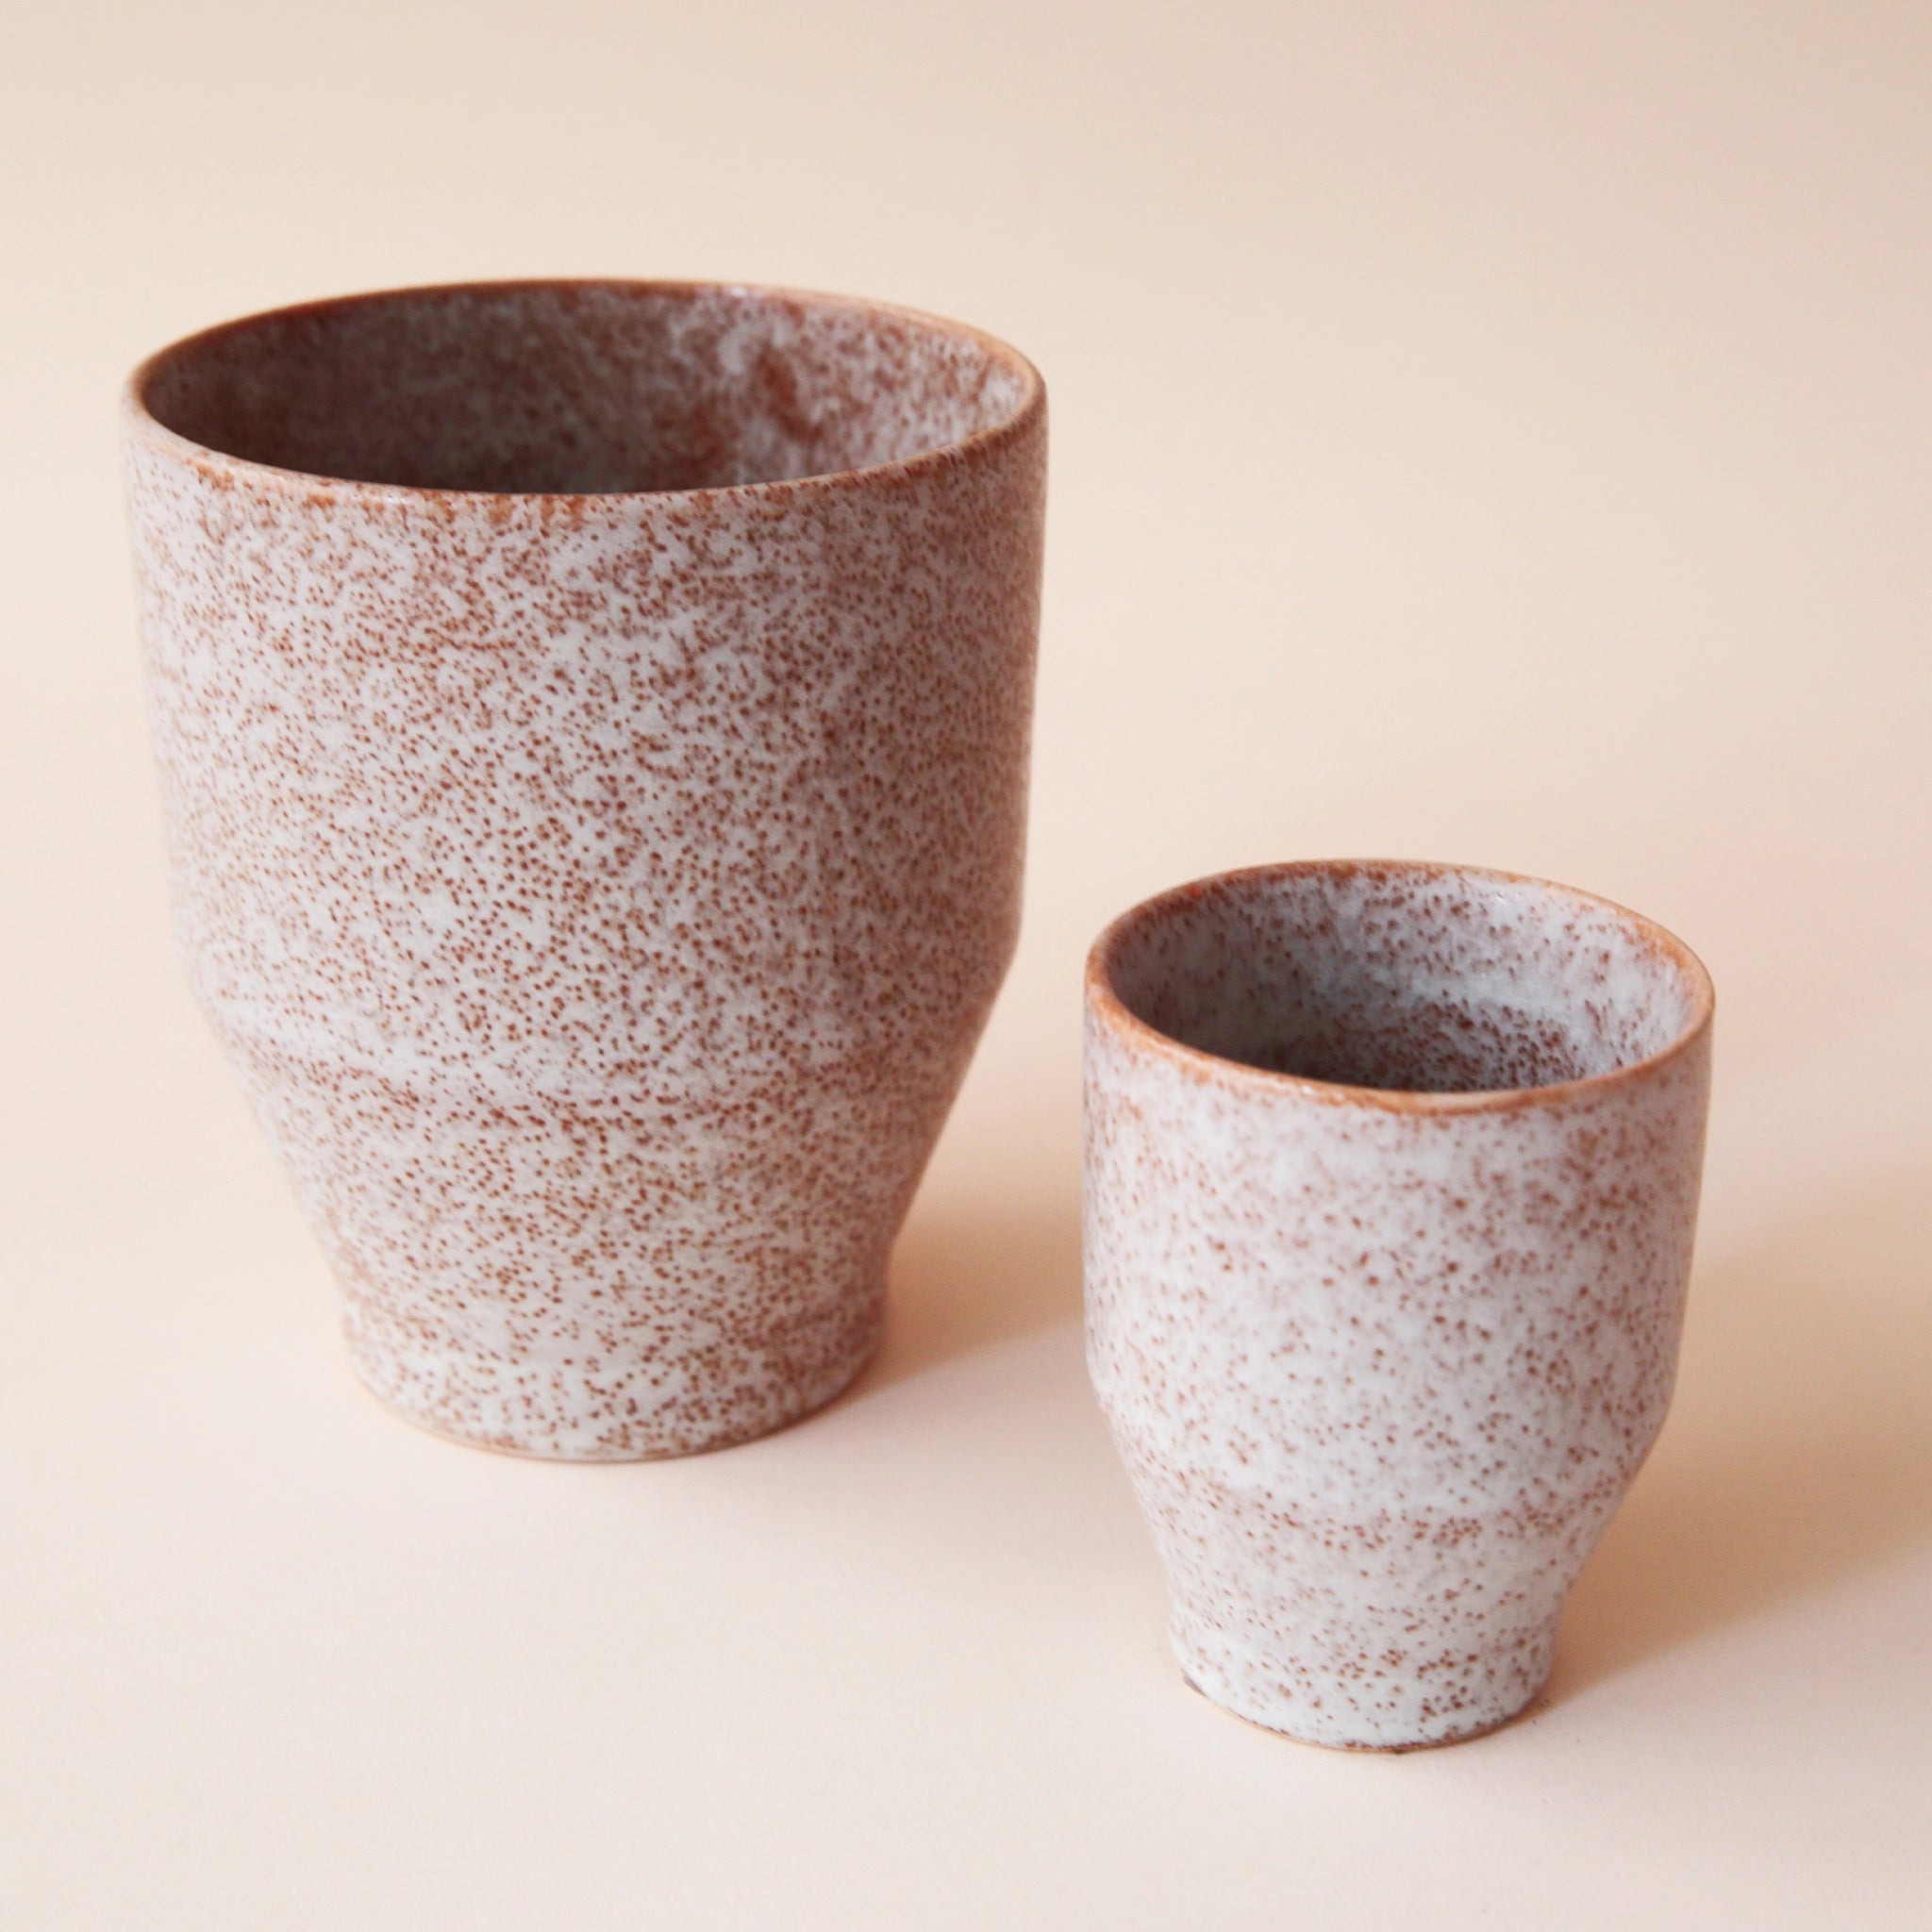 A small and large classic ceramic planter with a speckled white and tan texture.